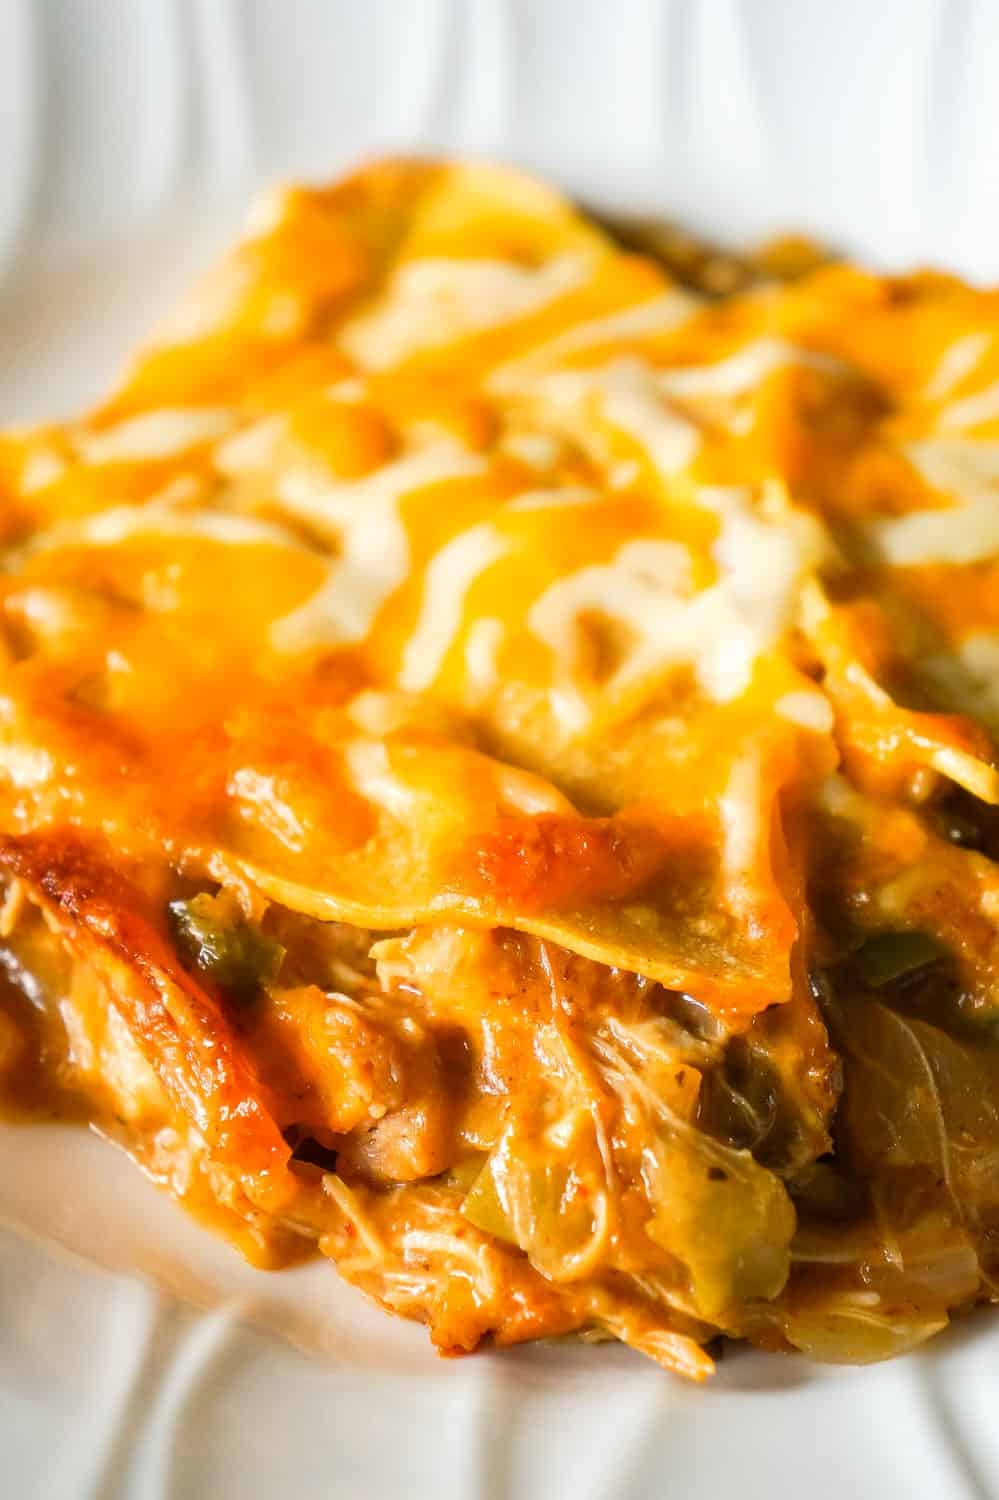 King Ranch Chicken Casserole is a creamy chicken casserole loaded with green peppers, chopped green chilies and layers of corn tortillas and cheese.